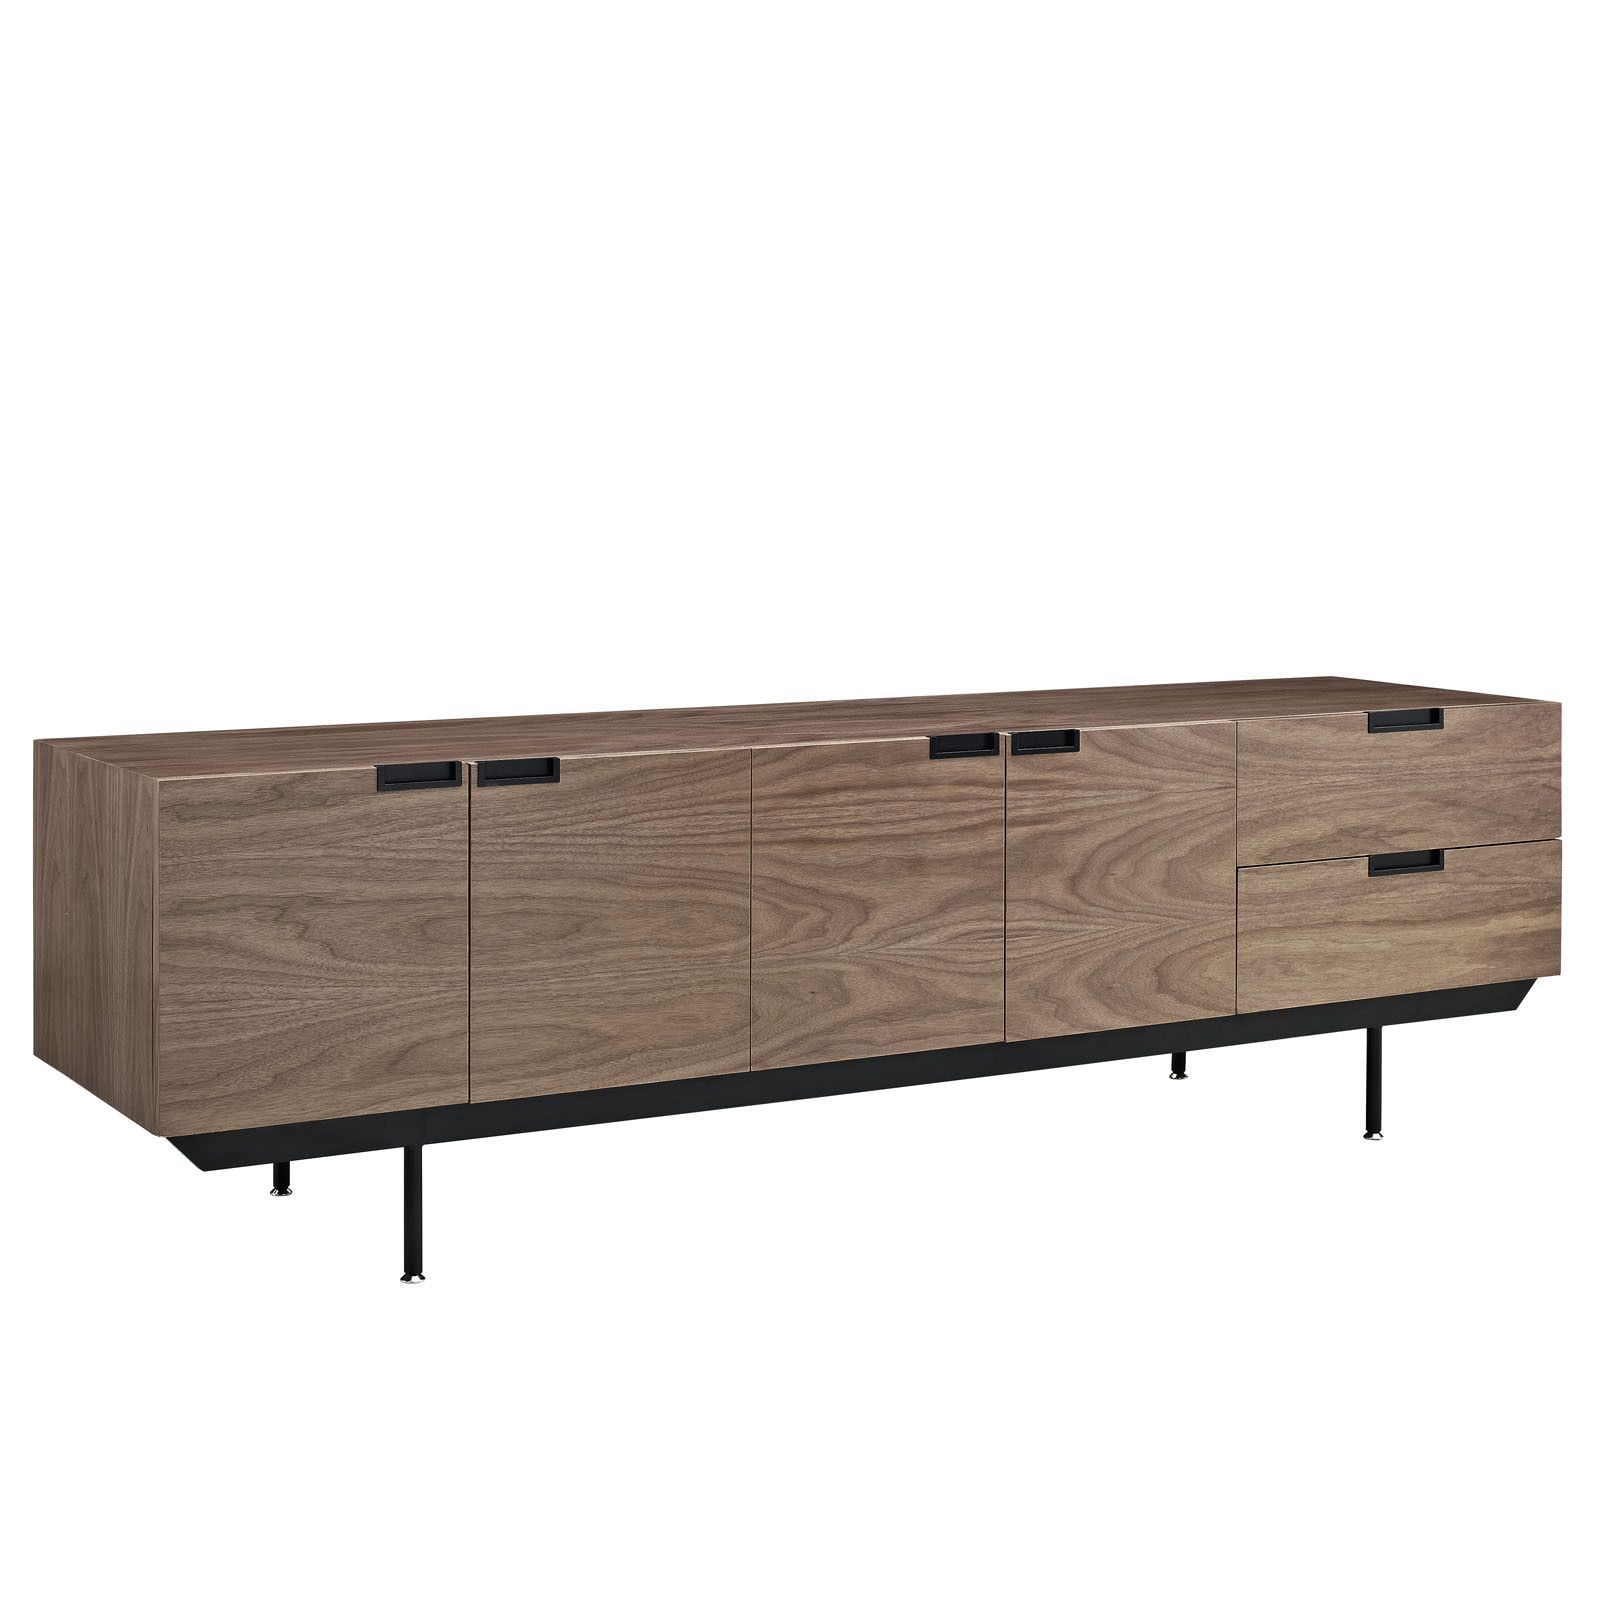 Herald Sideboard In 2019 | Products | Modern Sideboard, Tv With Regard To Dovray Sideboards (View 3 of 30)